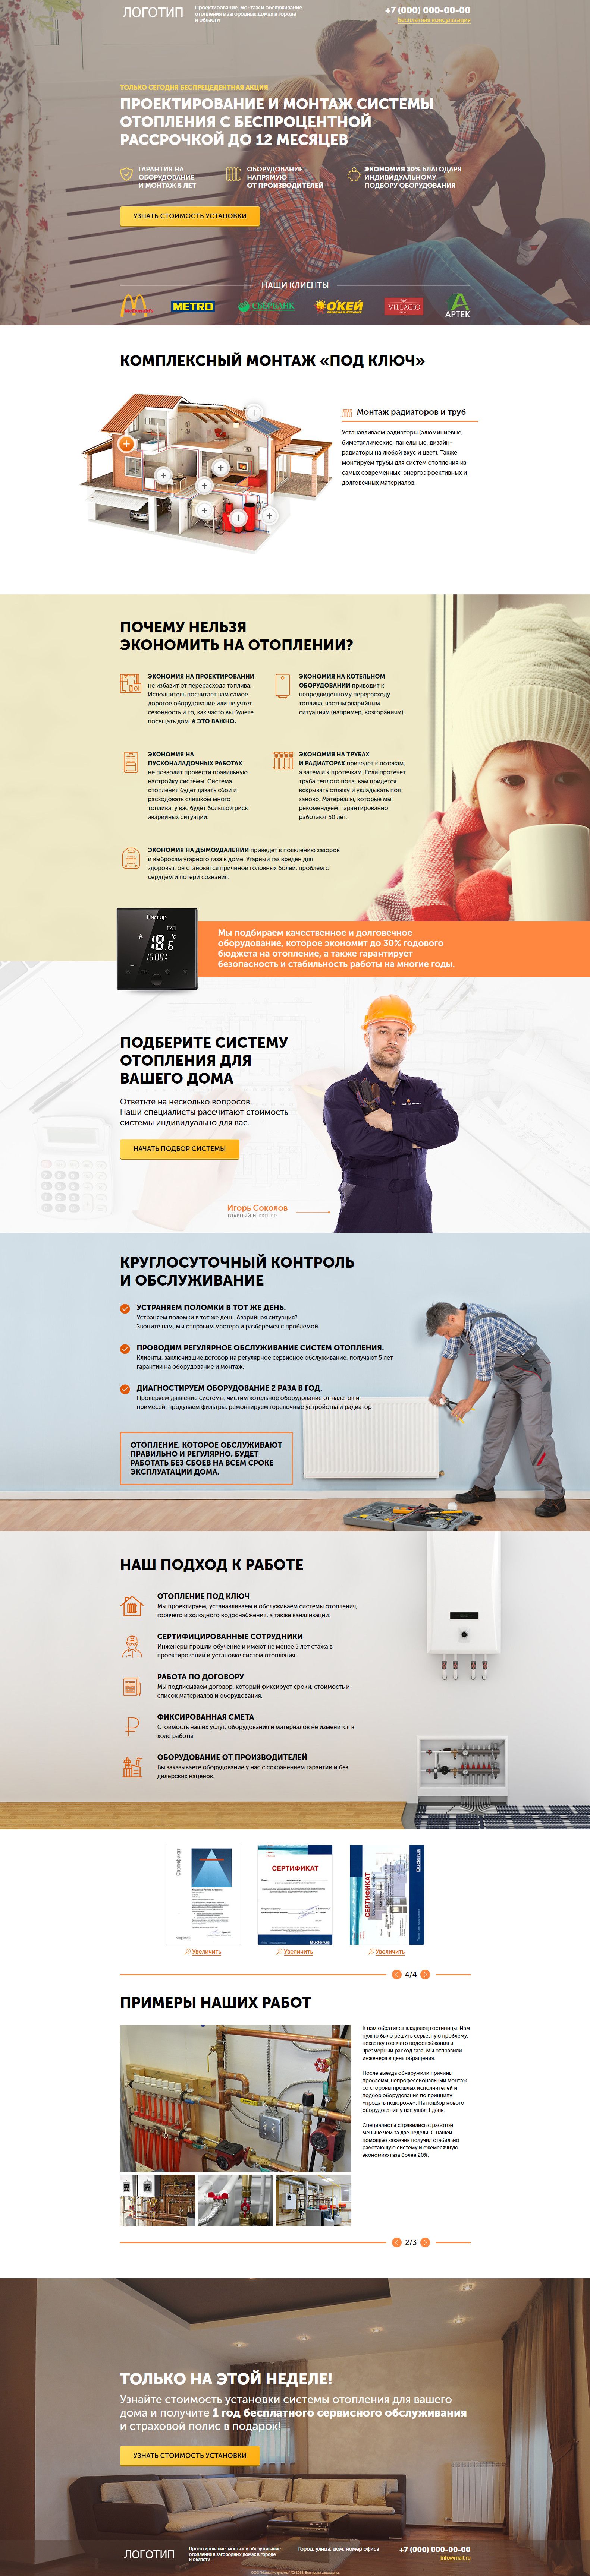 Landing page - Design and installation of heating systems